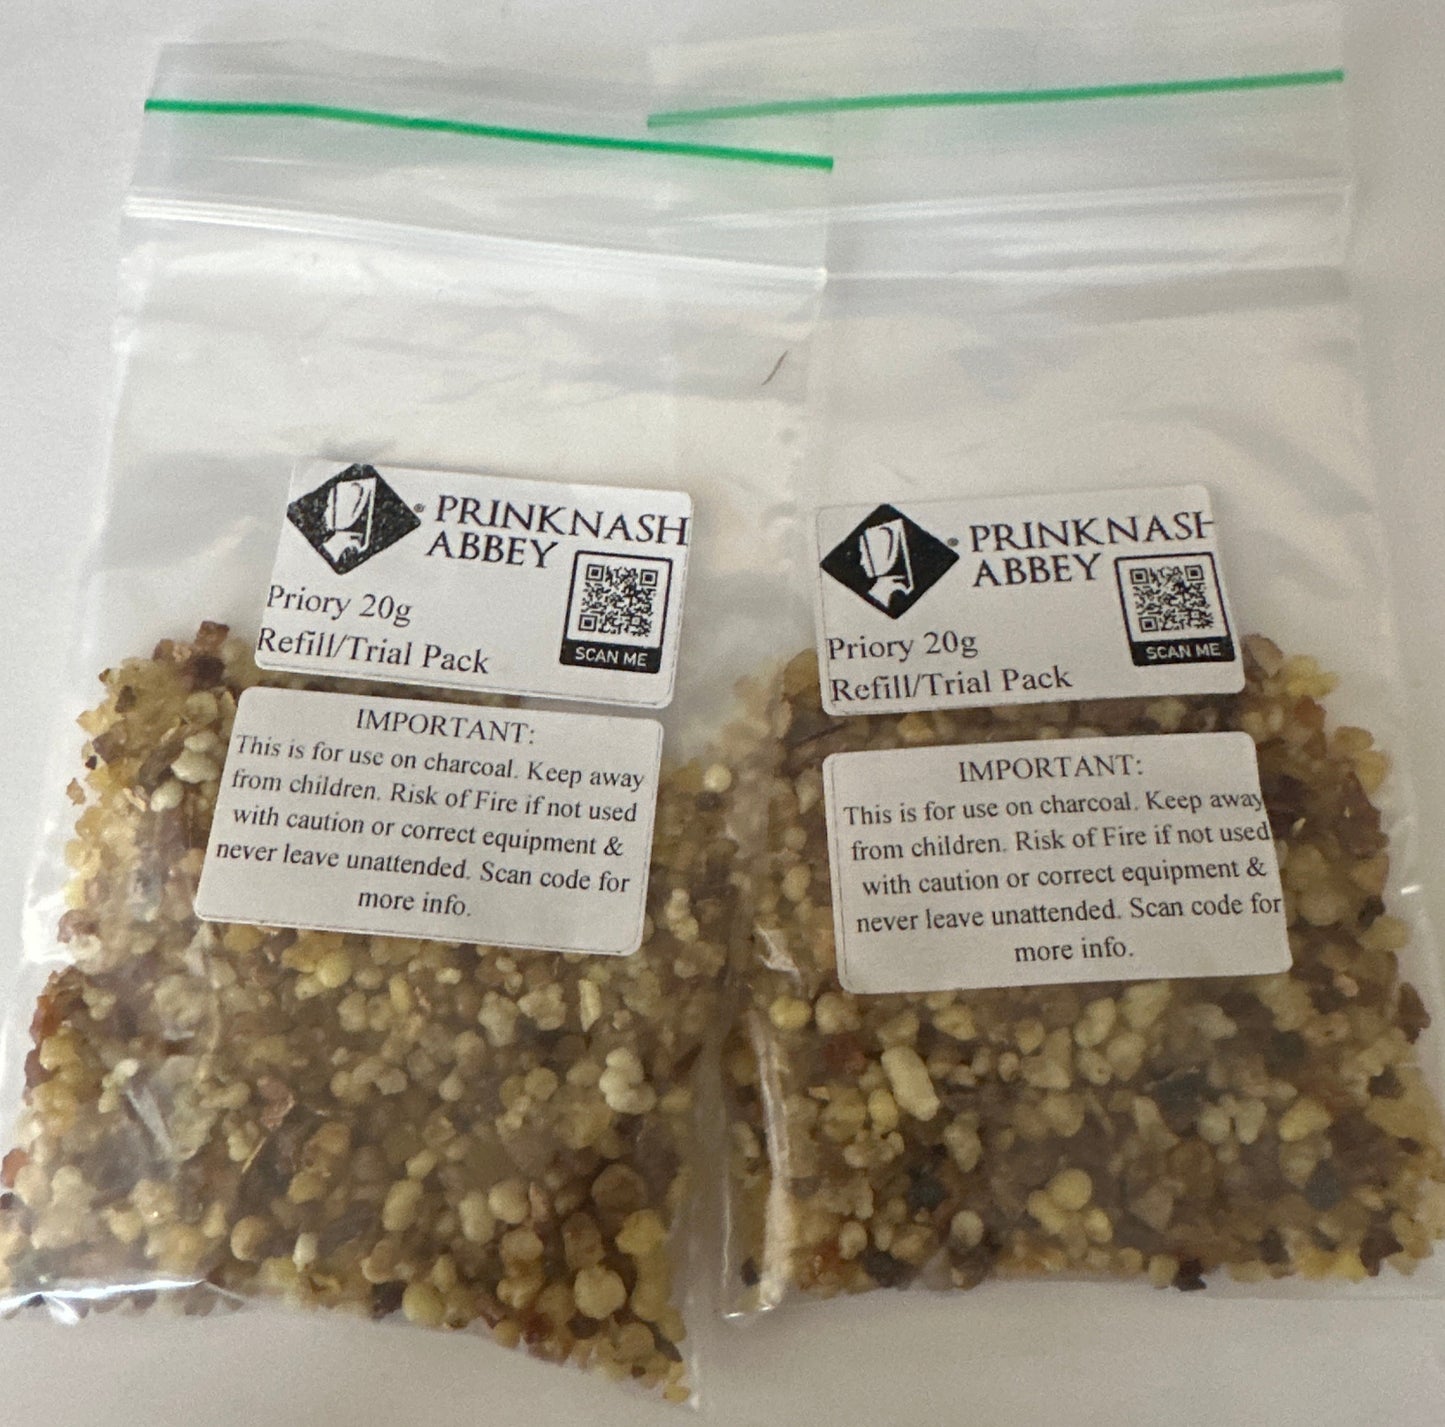 2 x 20g Refill or Trial Bags of Genuine Prinknash Abbey Resin Incense Priory Blend